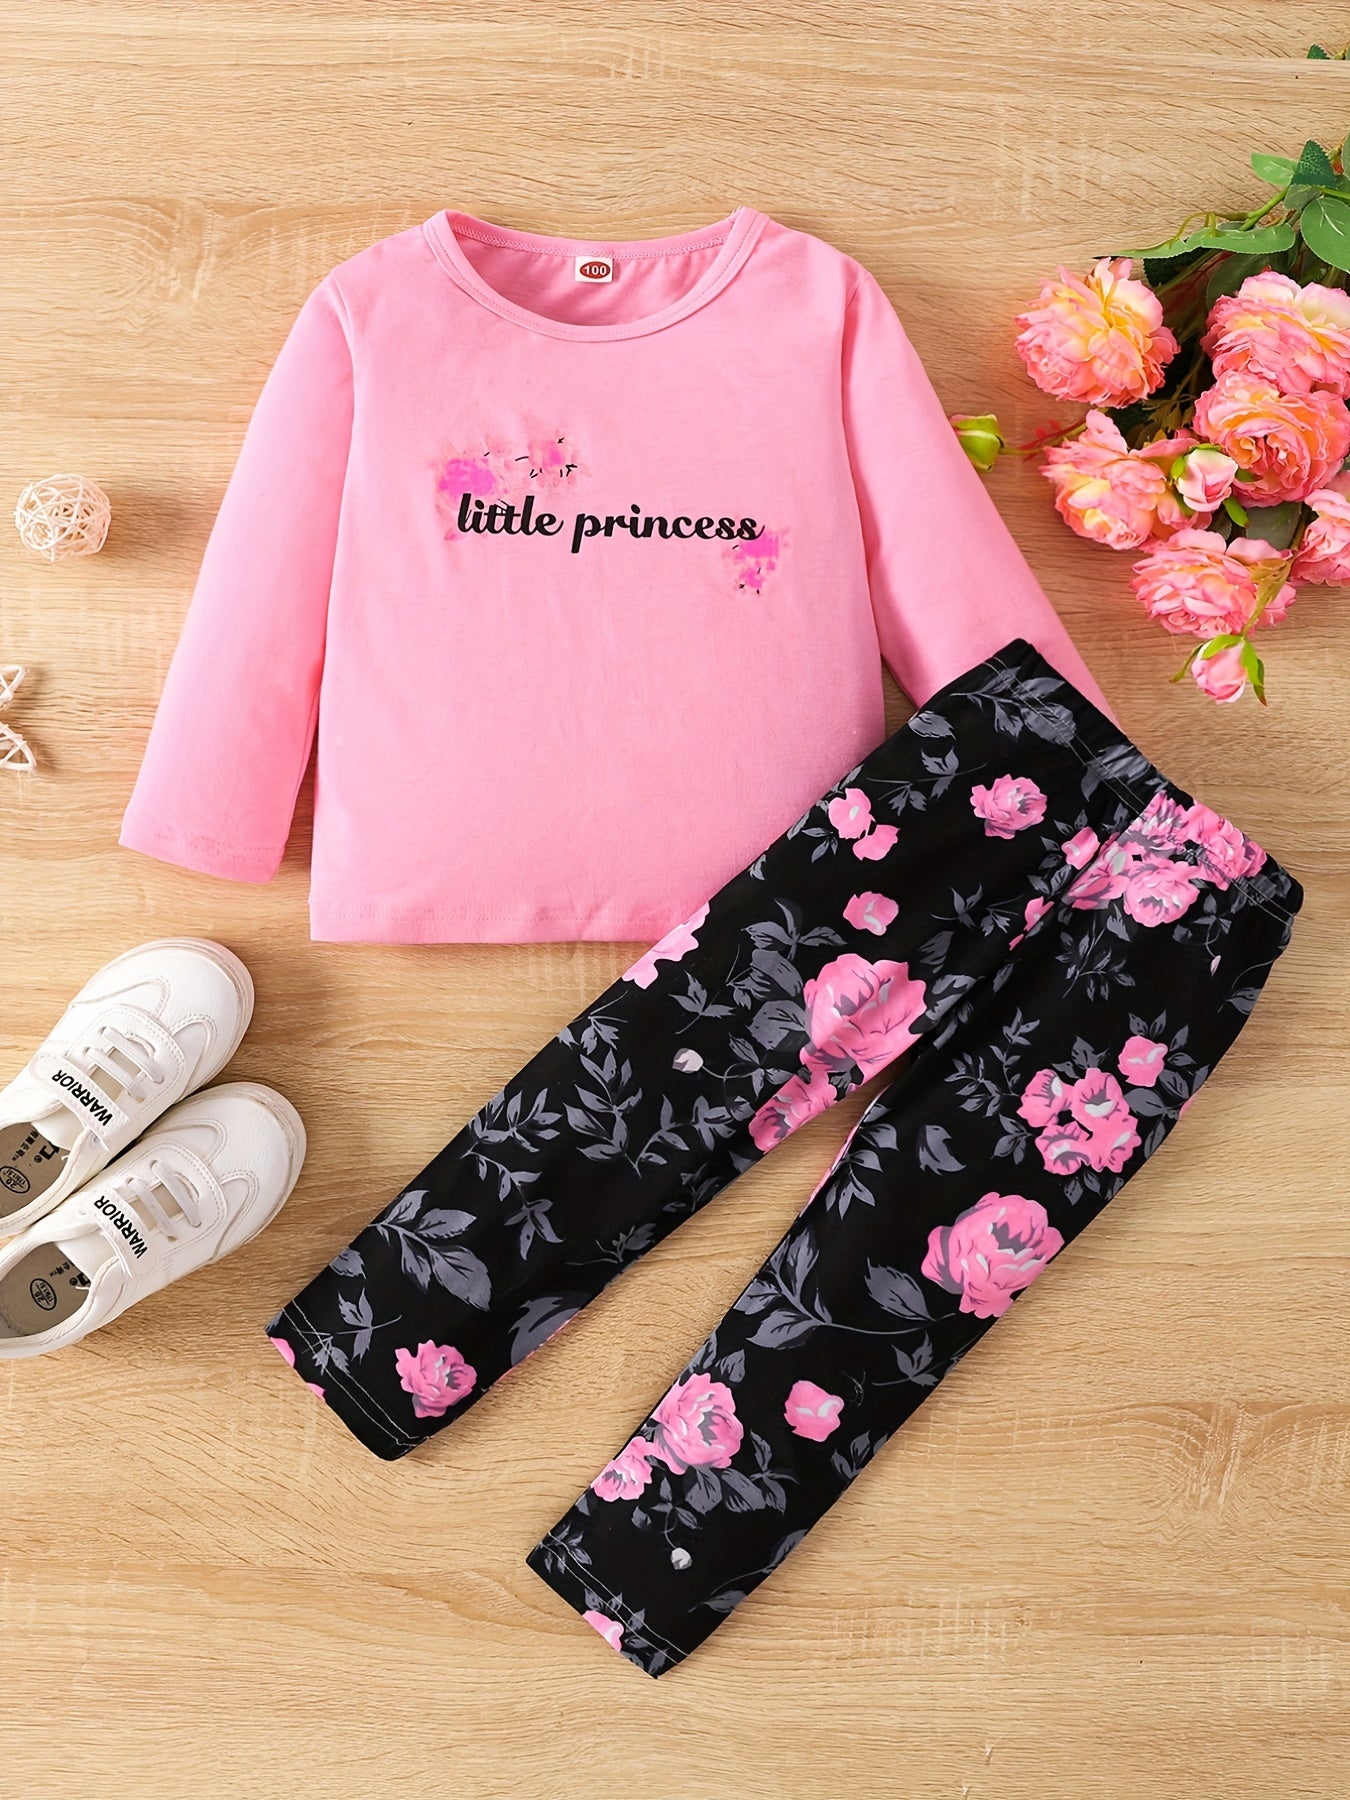 Girl's Floral Pattern Outfit 2pcs, Long Sleeve Top & Leggings Set, LITTLE PRINCESS Print Kid's Clothes For Spring Fall